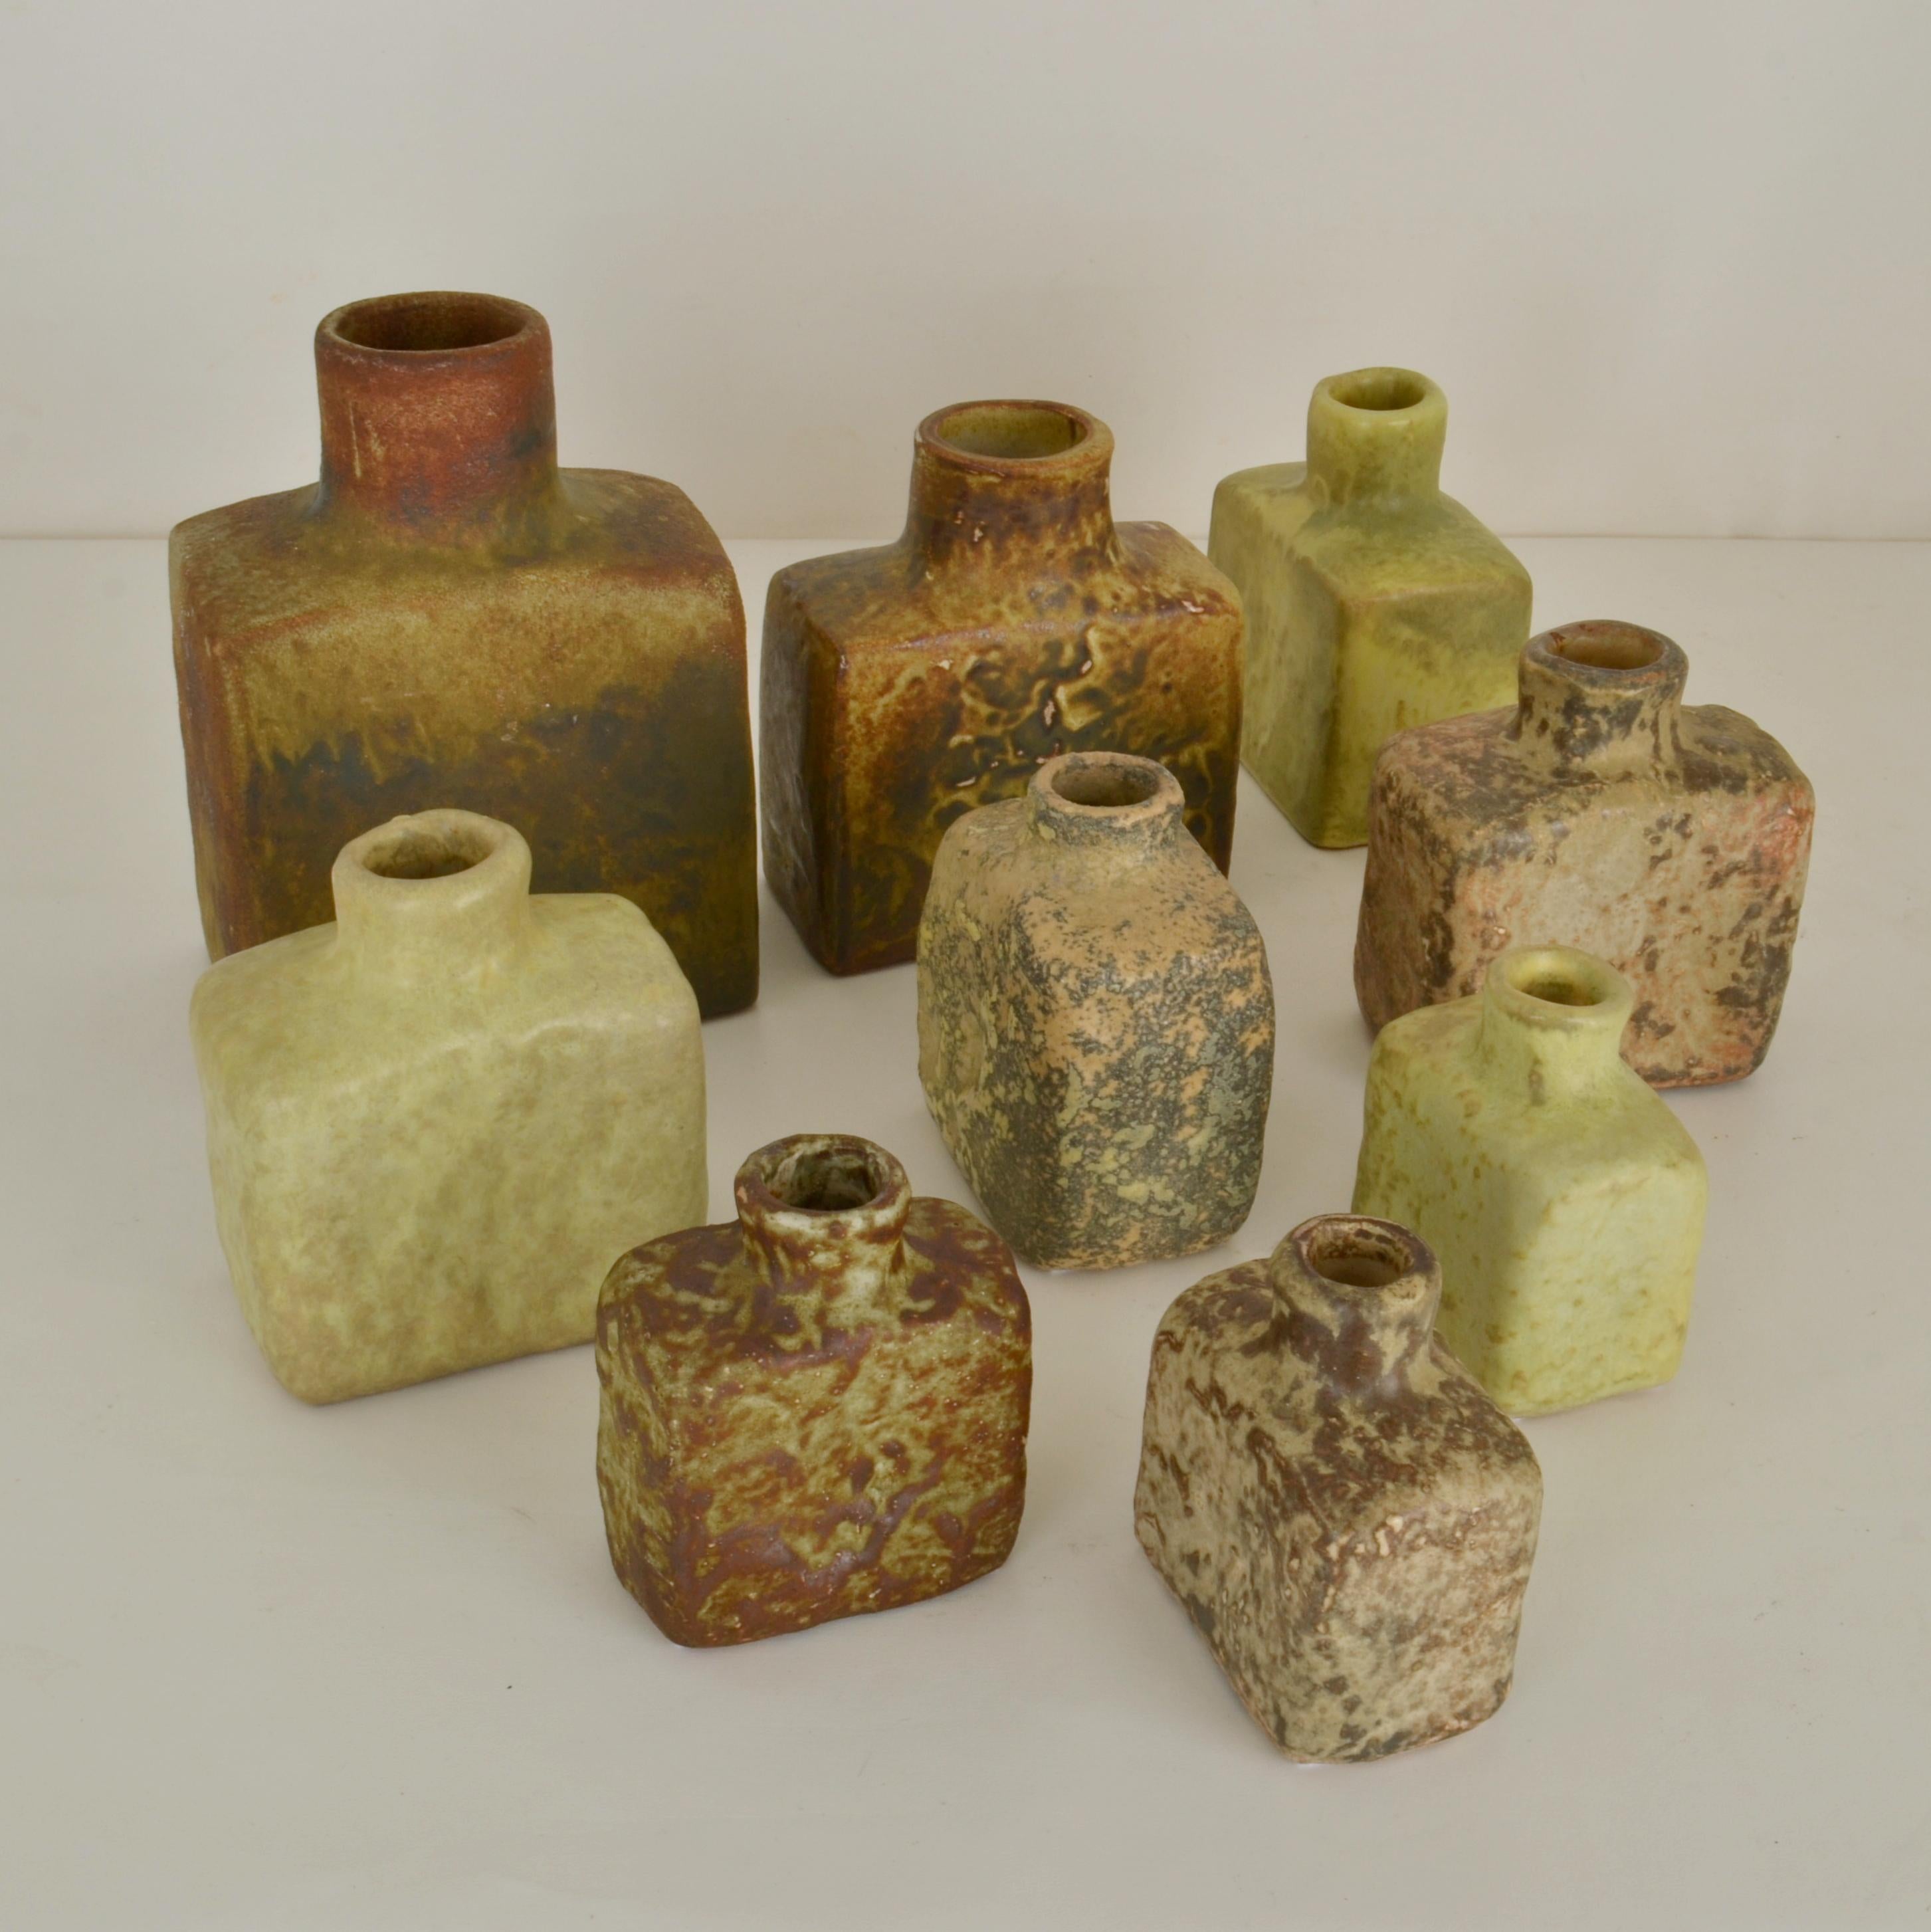 Group of Square Studio Ceramic Vases in Sage and Earth Tones For Sale 3